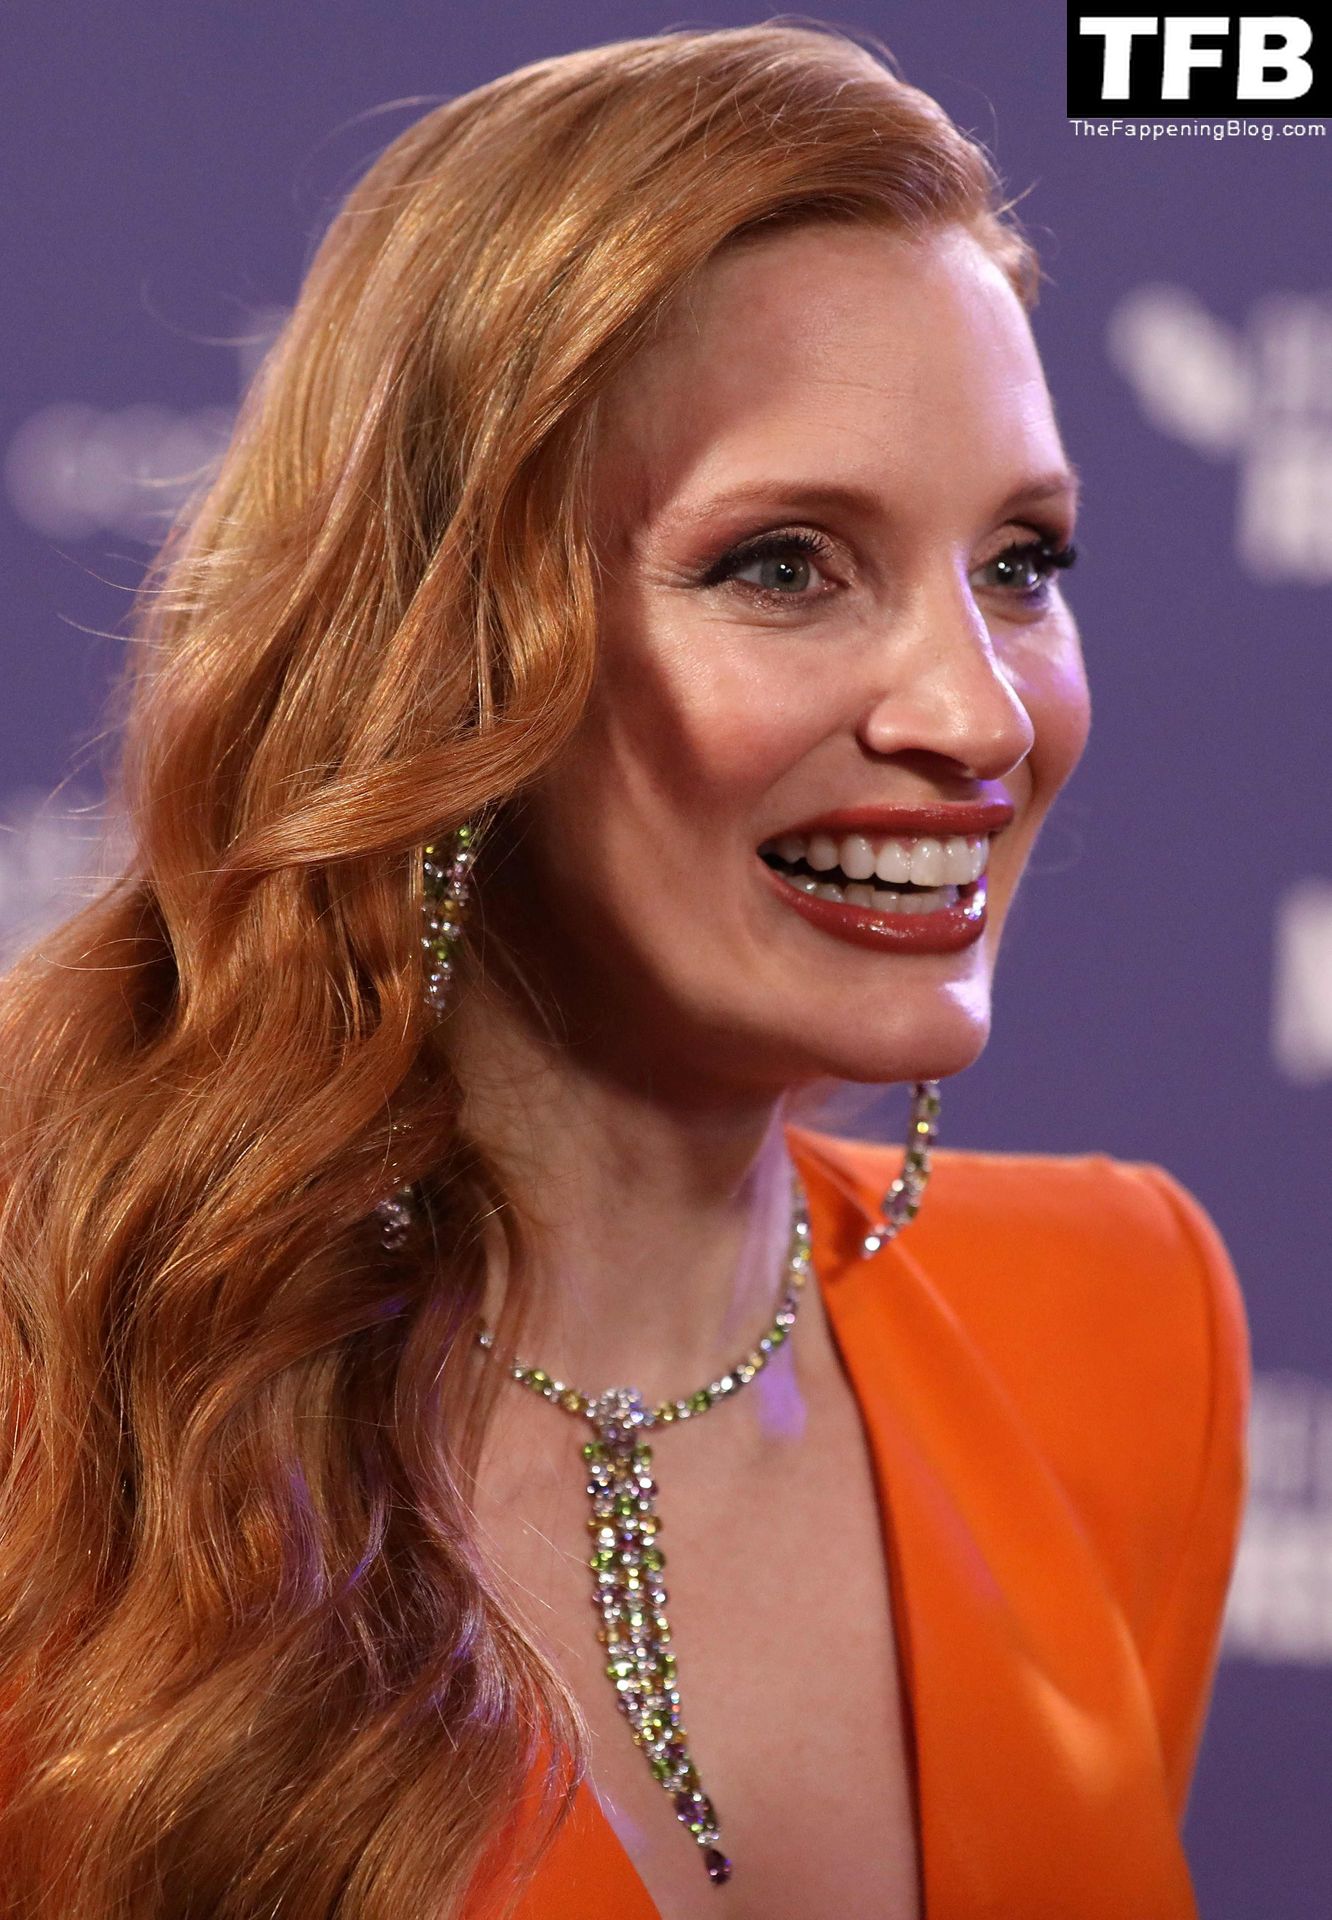 Jessica-Chastain-Sexy-The-Fappening-Blog-50.jpg